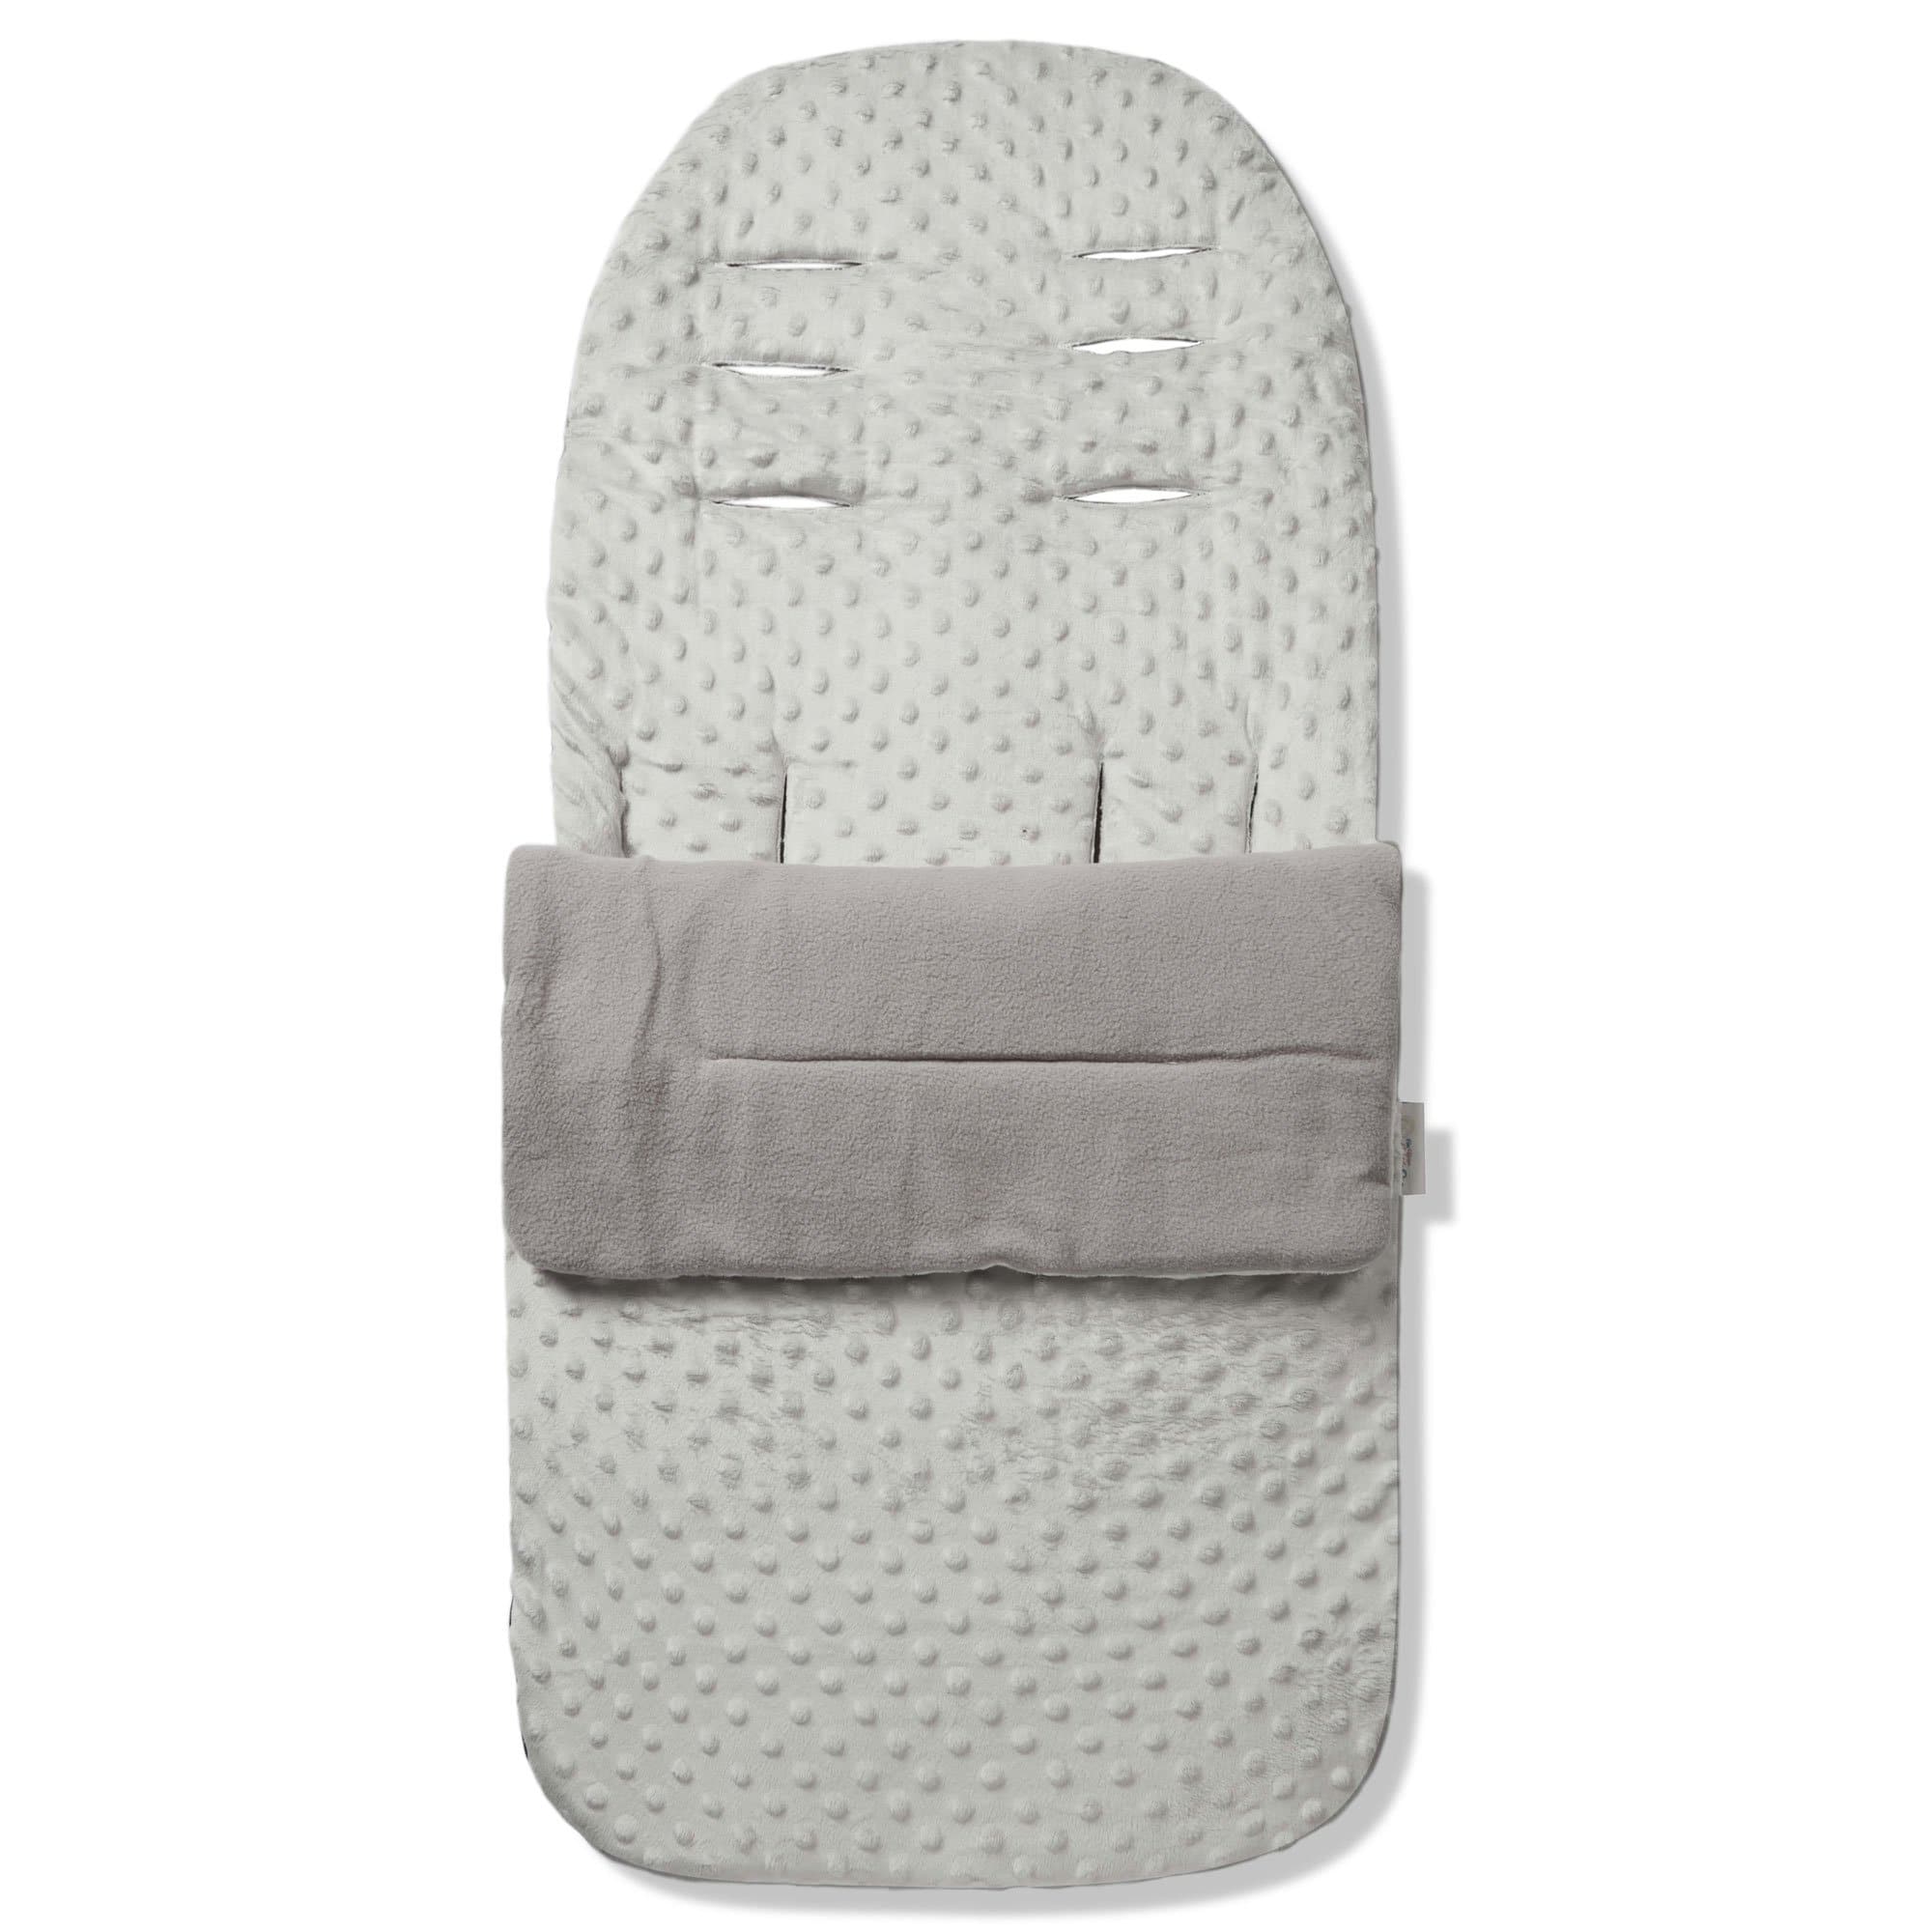 Dimple Footmuff / Cosy Toes Compatible with Uppababy - Grey / Fits All Models | For Your Little One